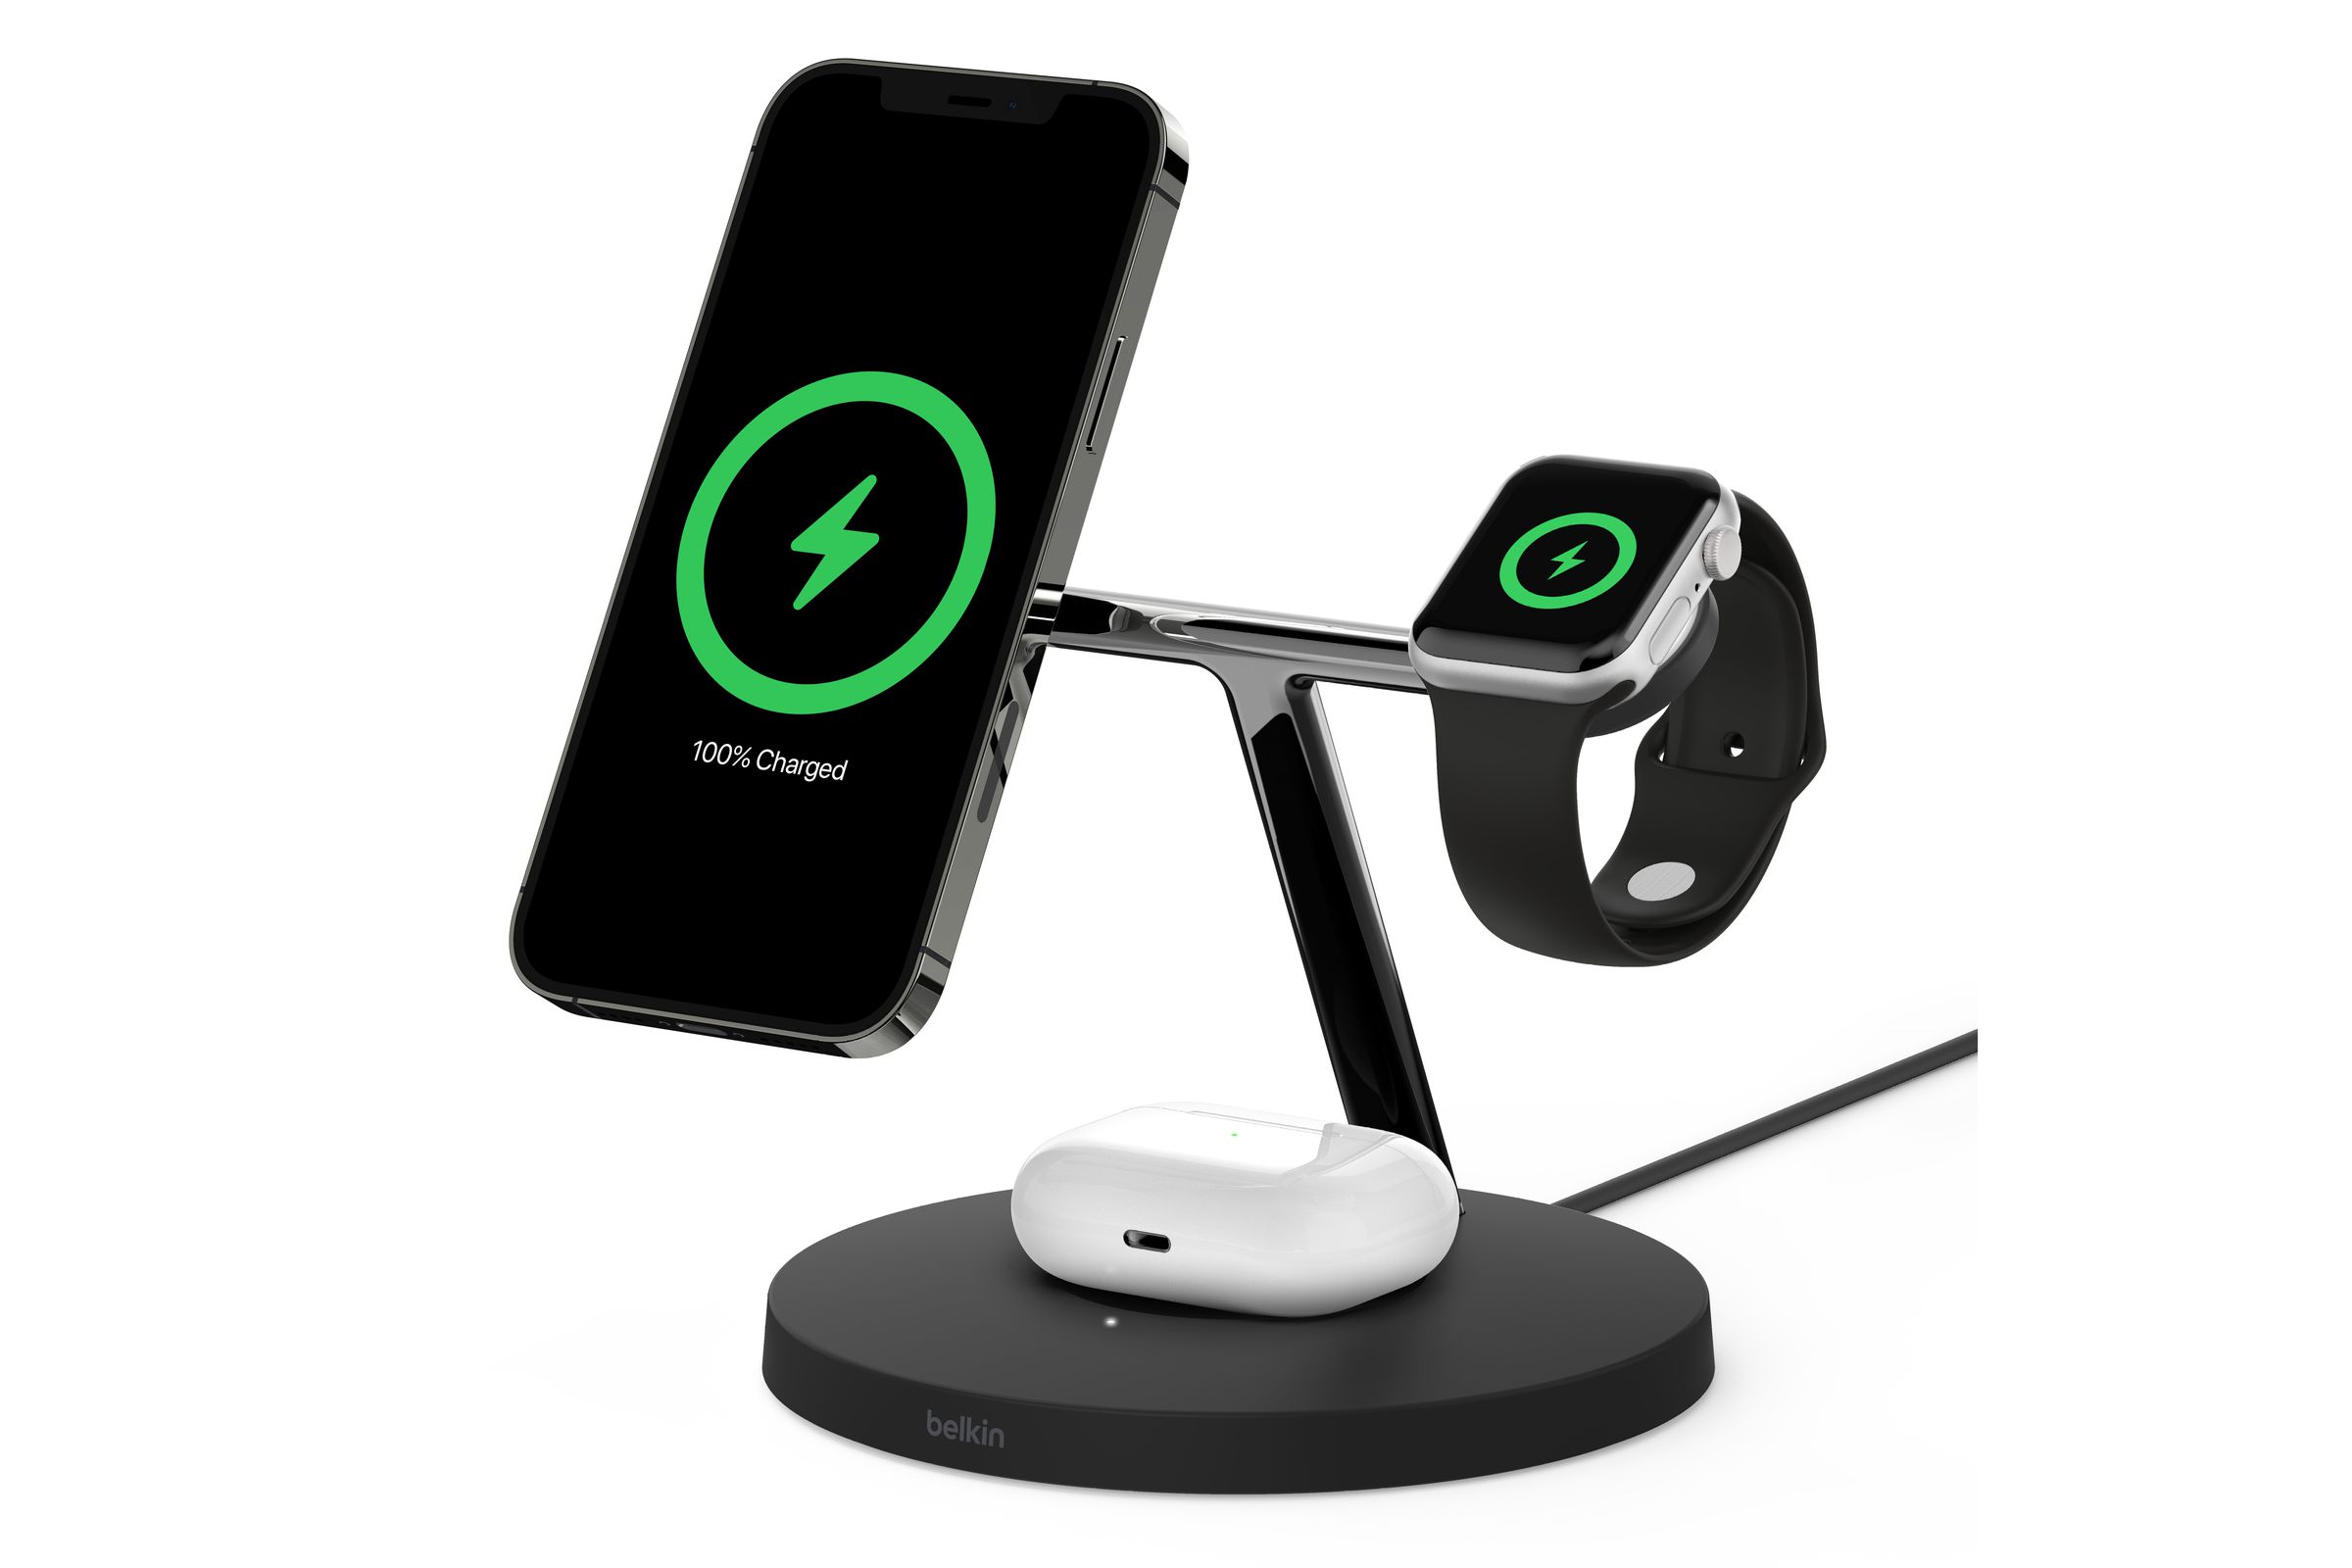 Picture of a Belkin charger with spots for the iPhone and Apple Watch, as well as a standard Qi charging pad.